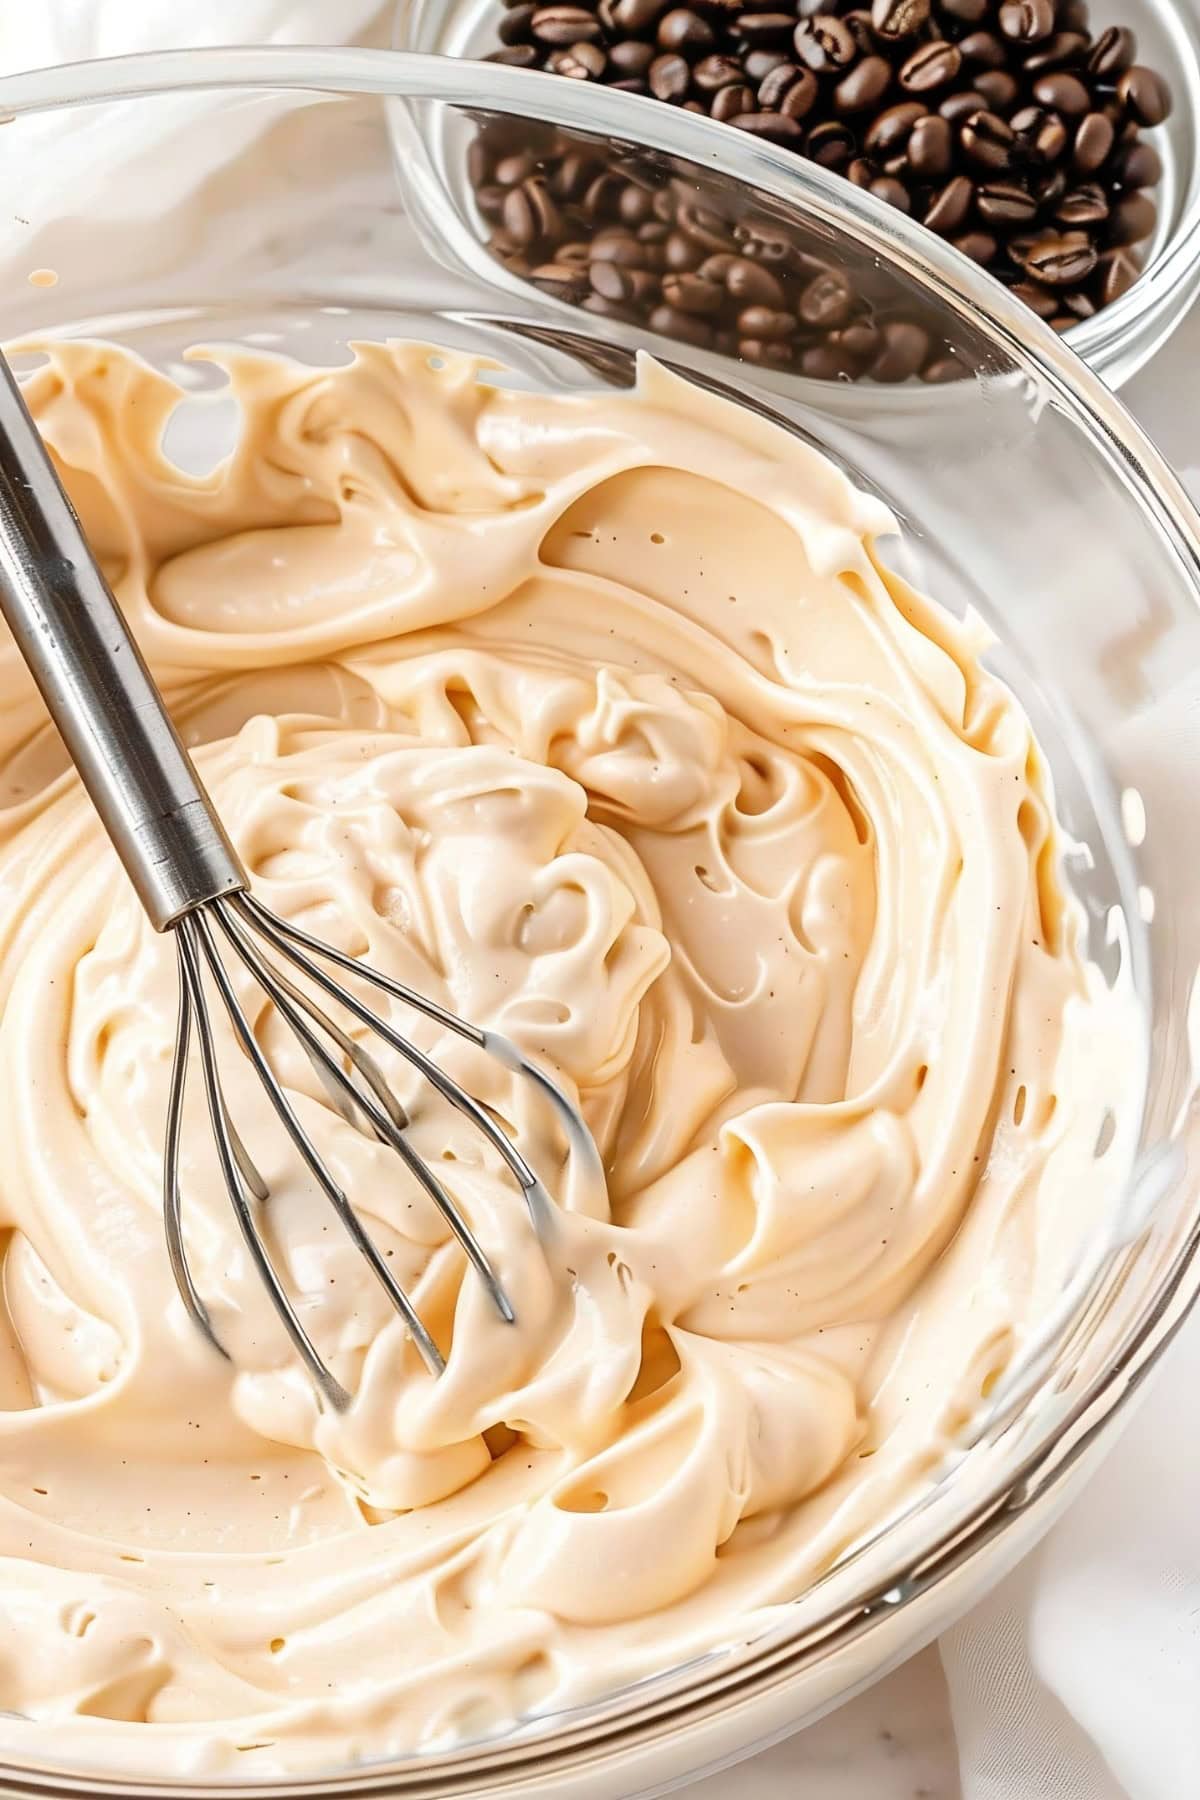 Coffee whipped cream being whisked in a bowl with a bowl of coffee beans on the side